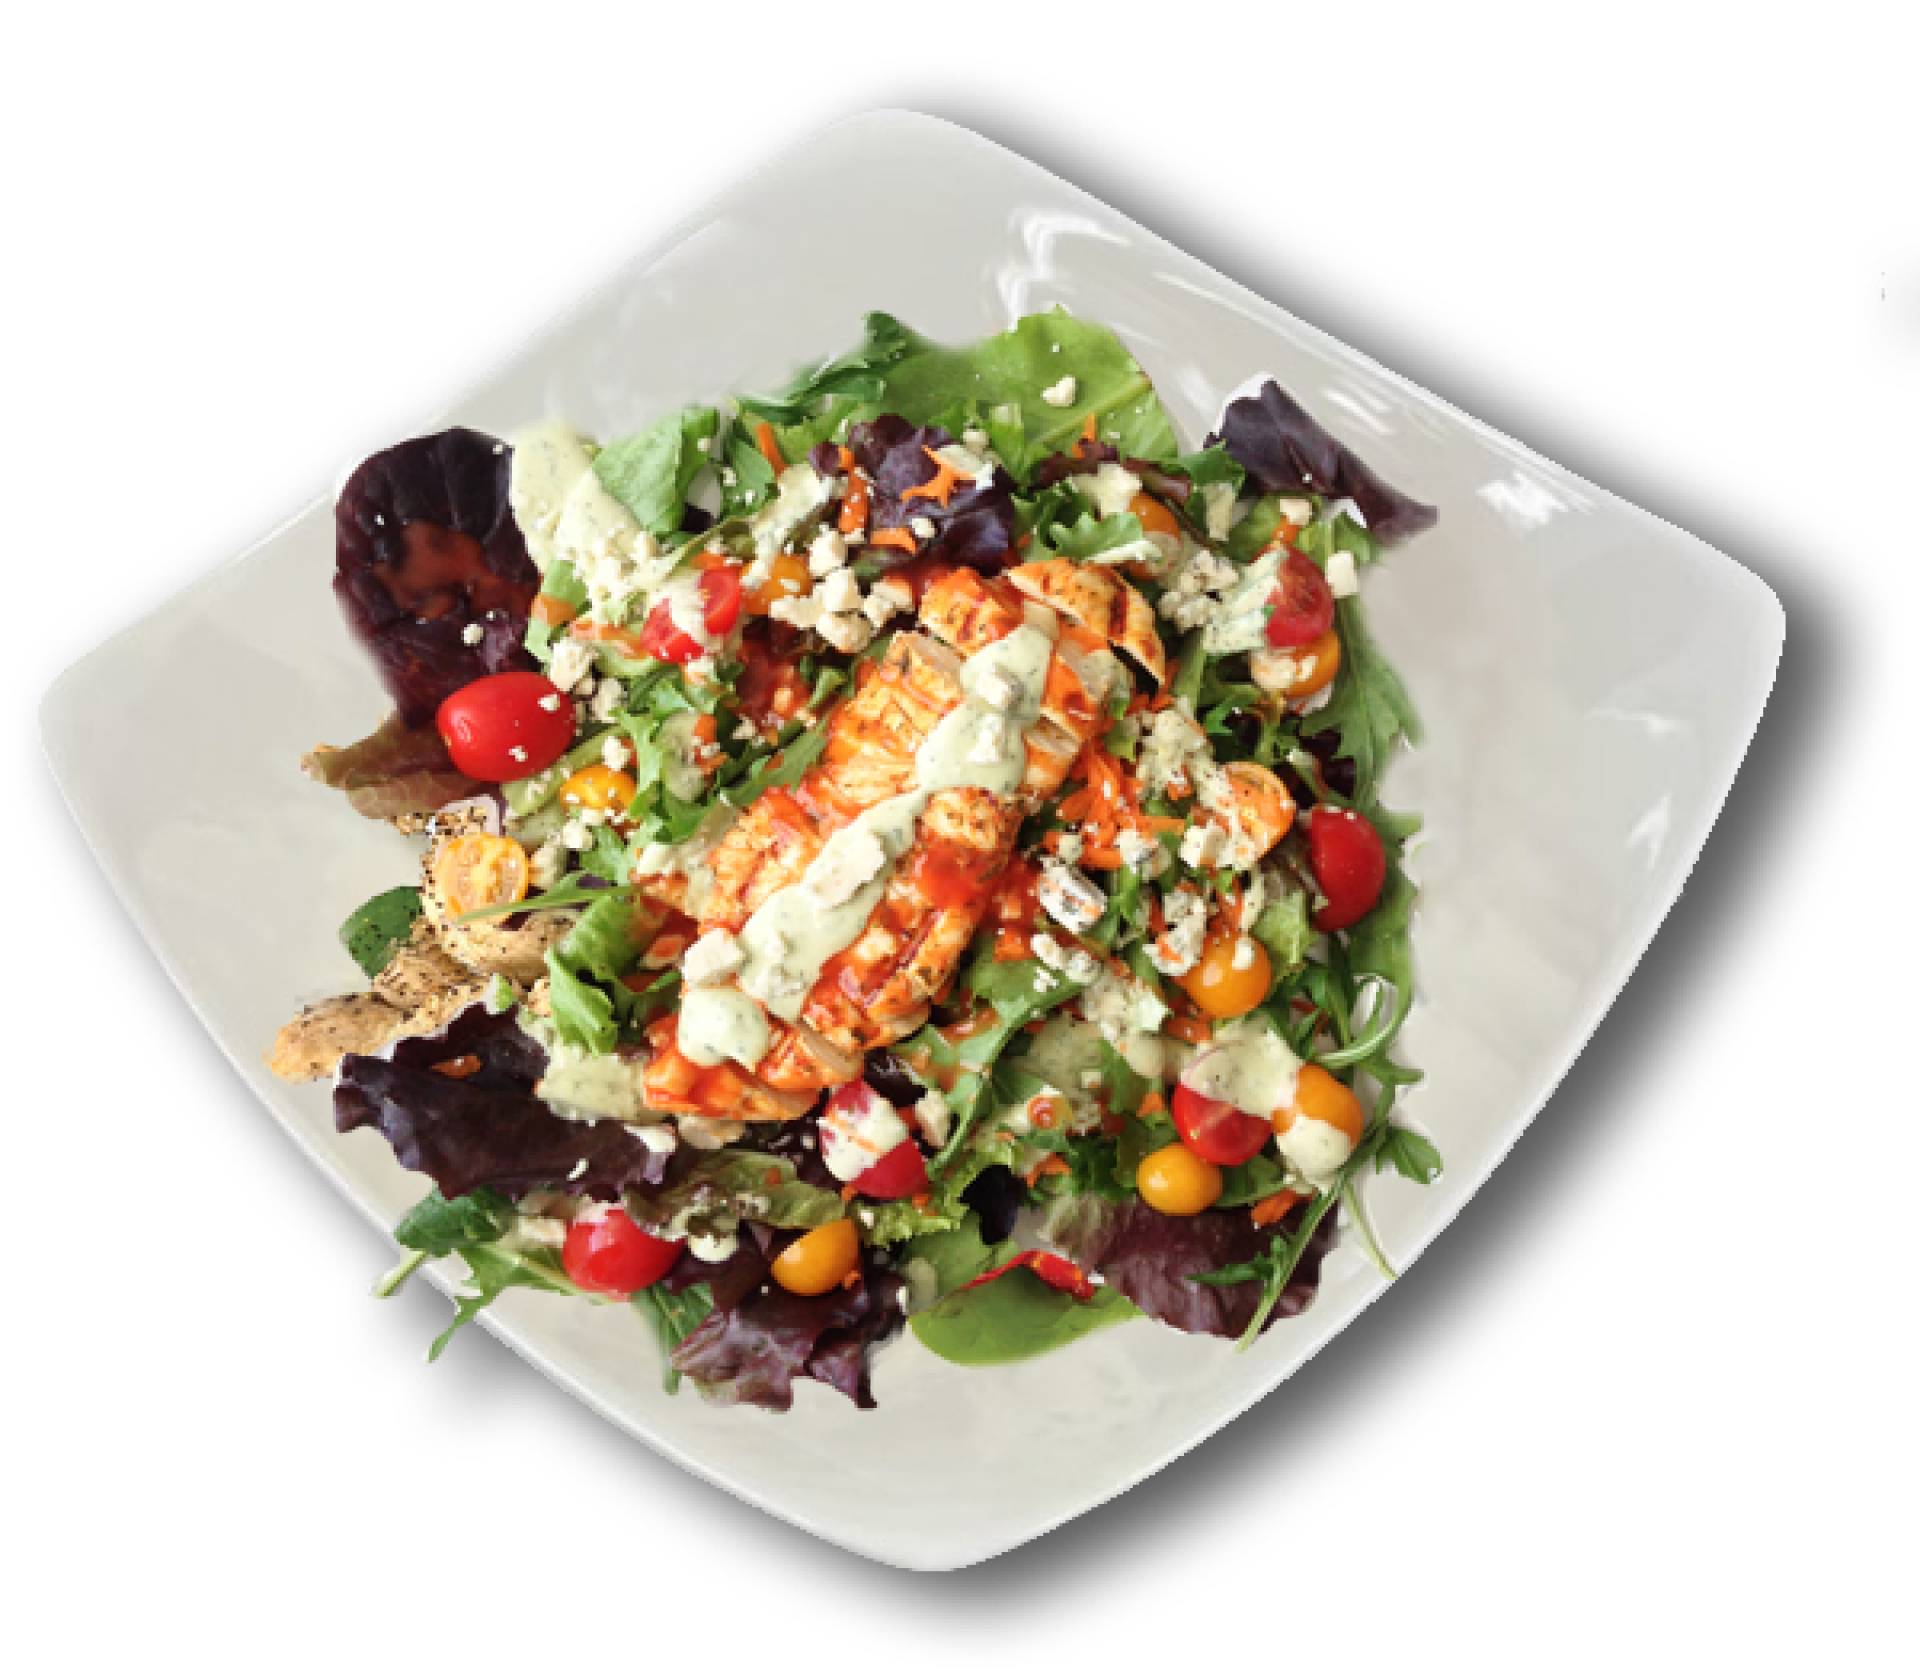 Buffalo Chicken Salad with Ranch Dressing - Low Fat